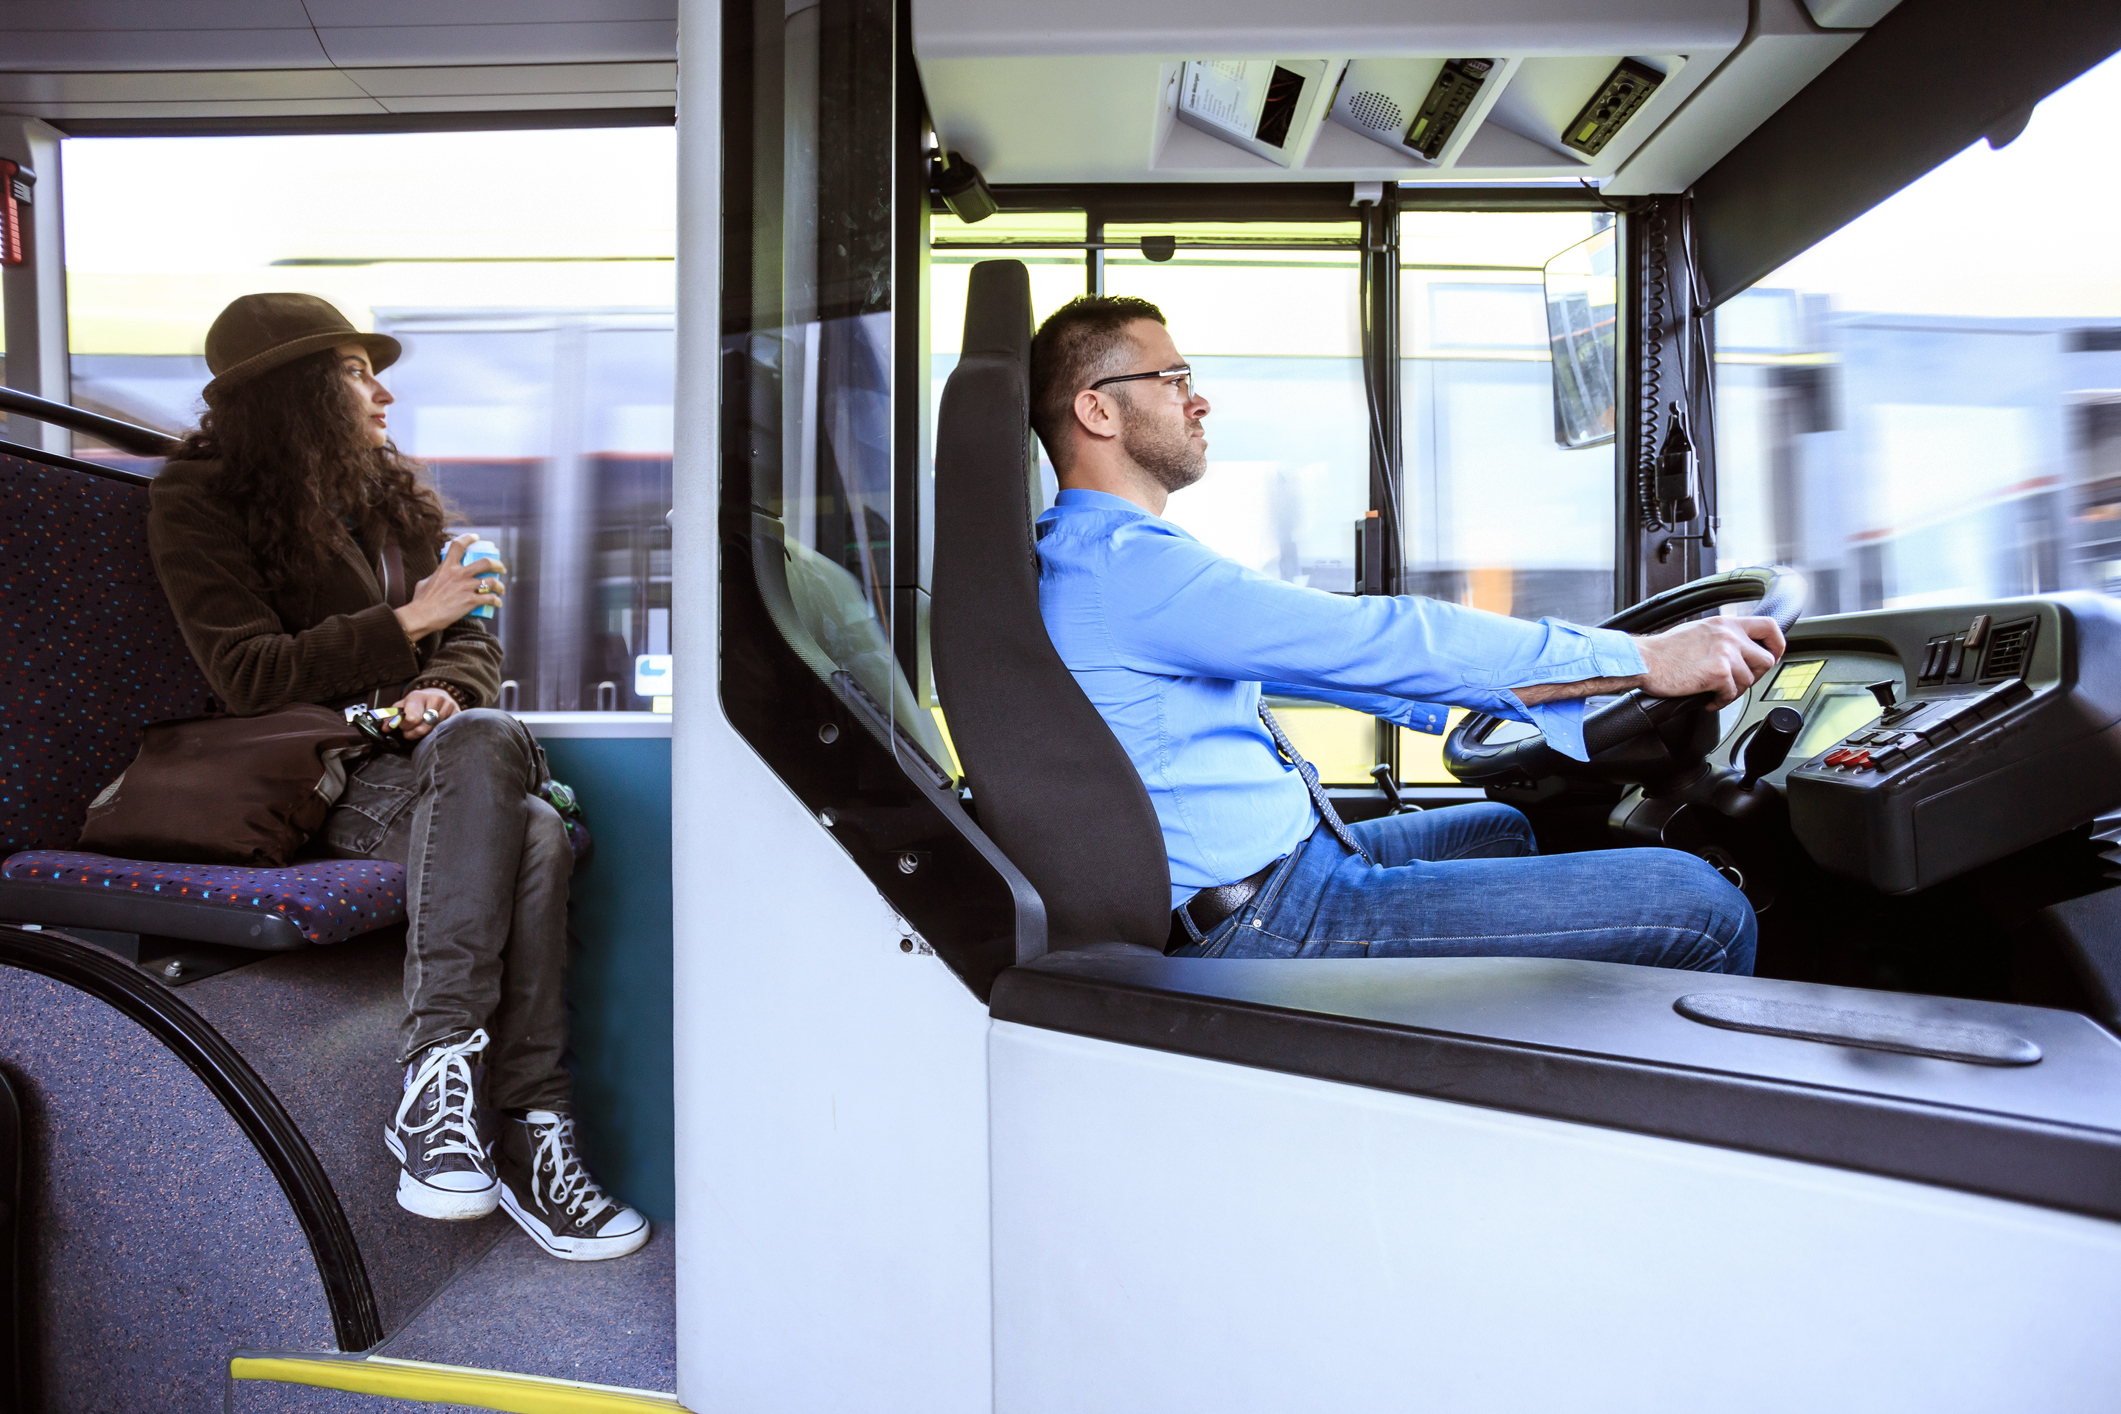 6 Safety Tips for Bus Drivers & Bus Companies